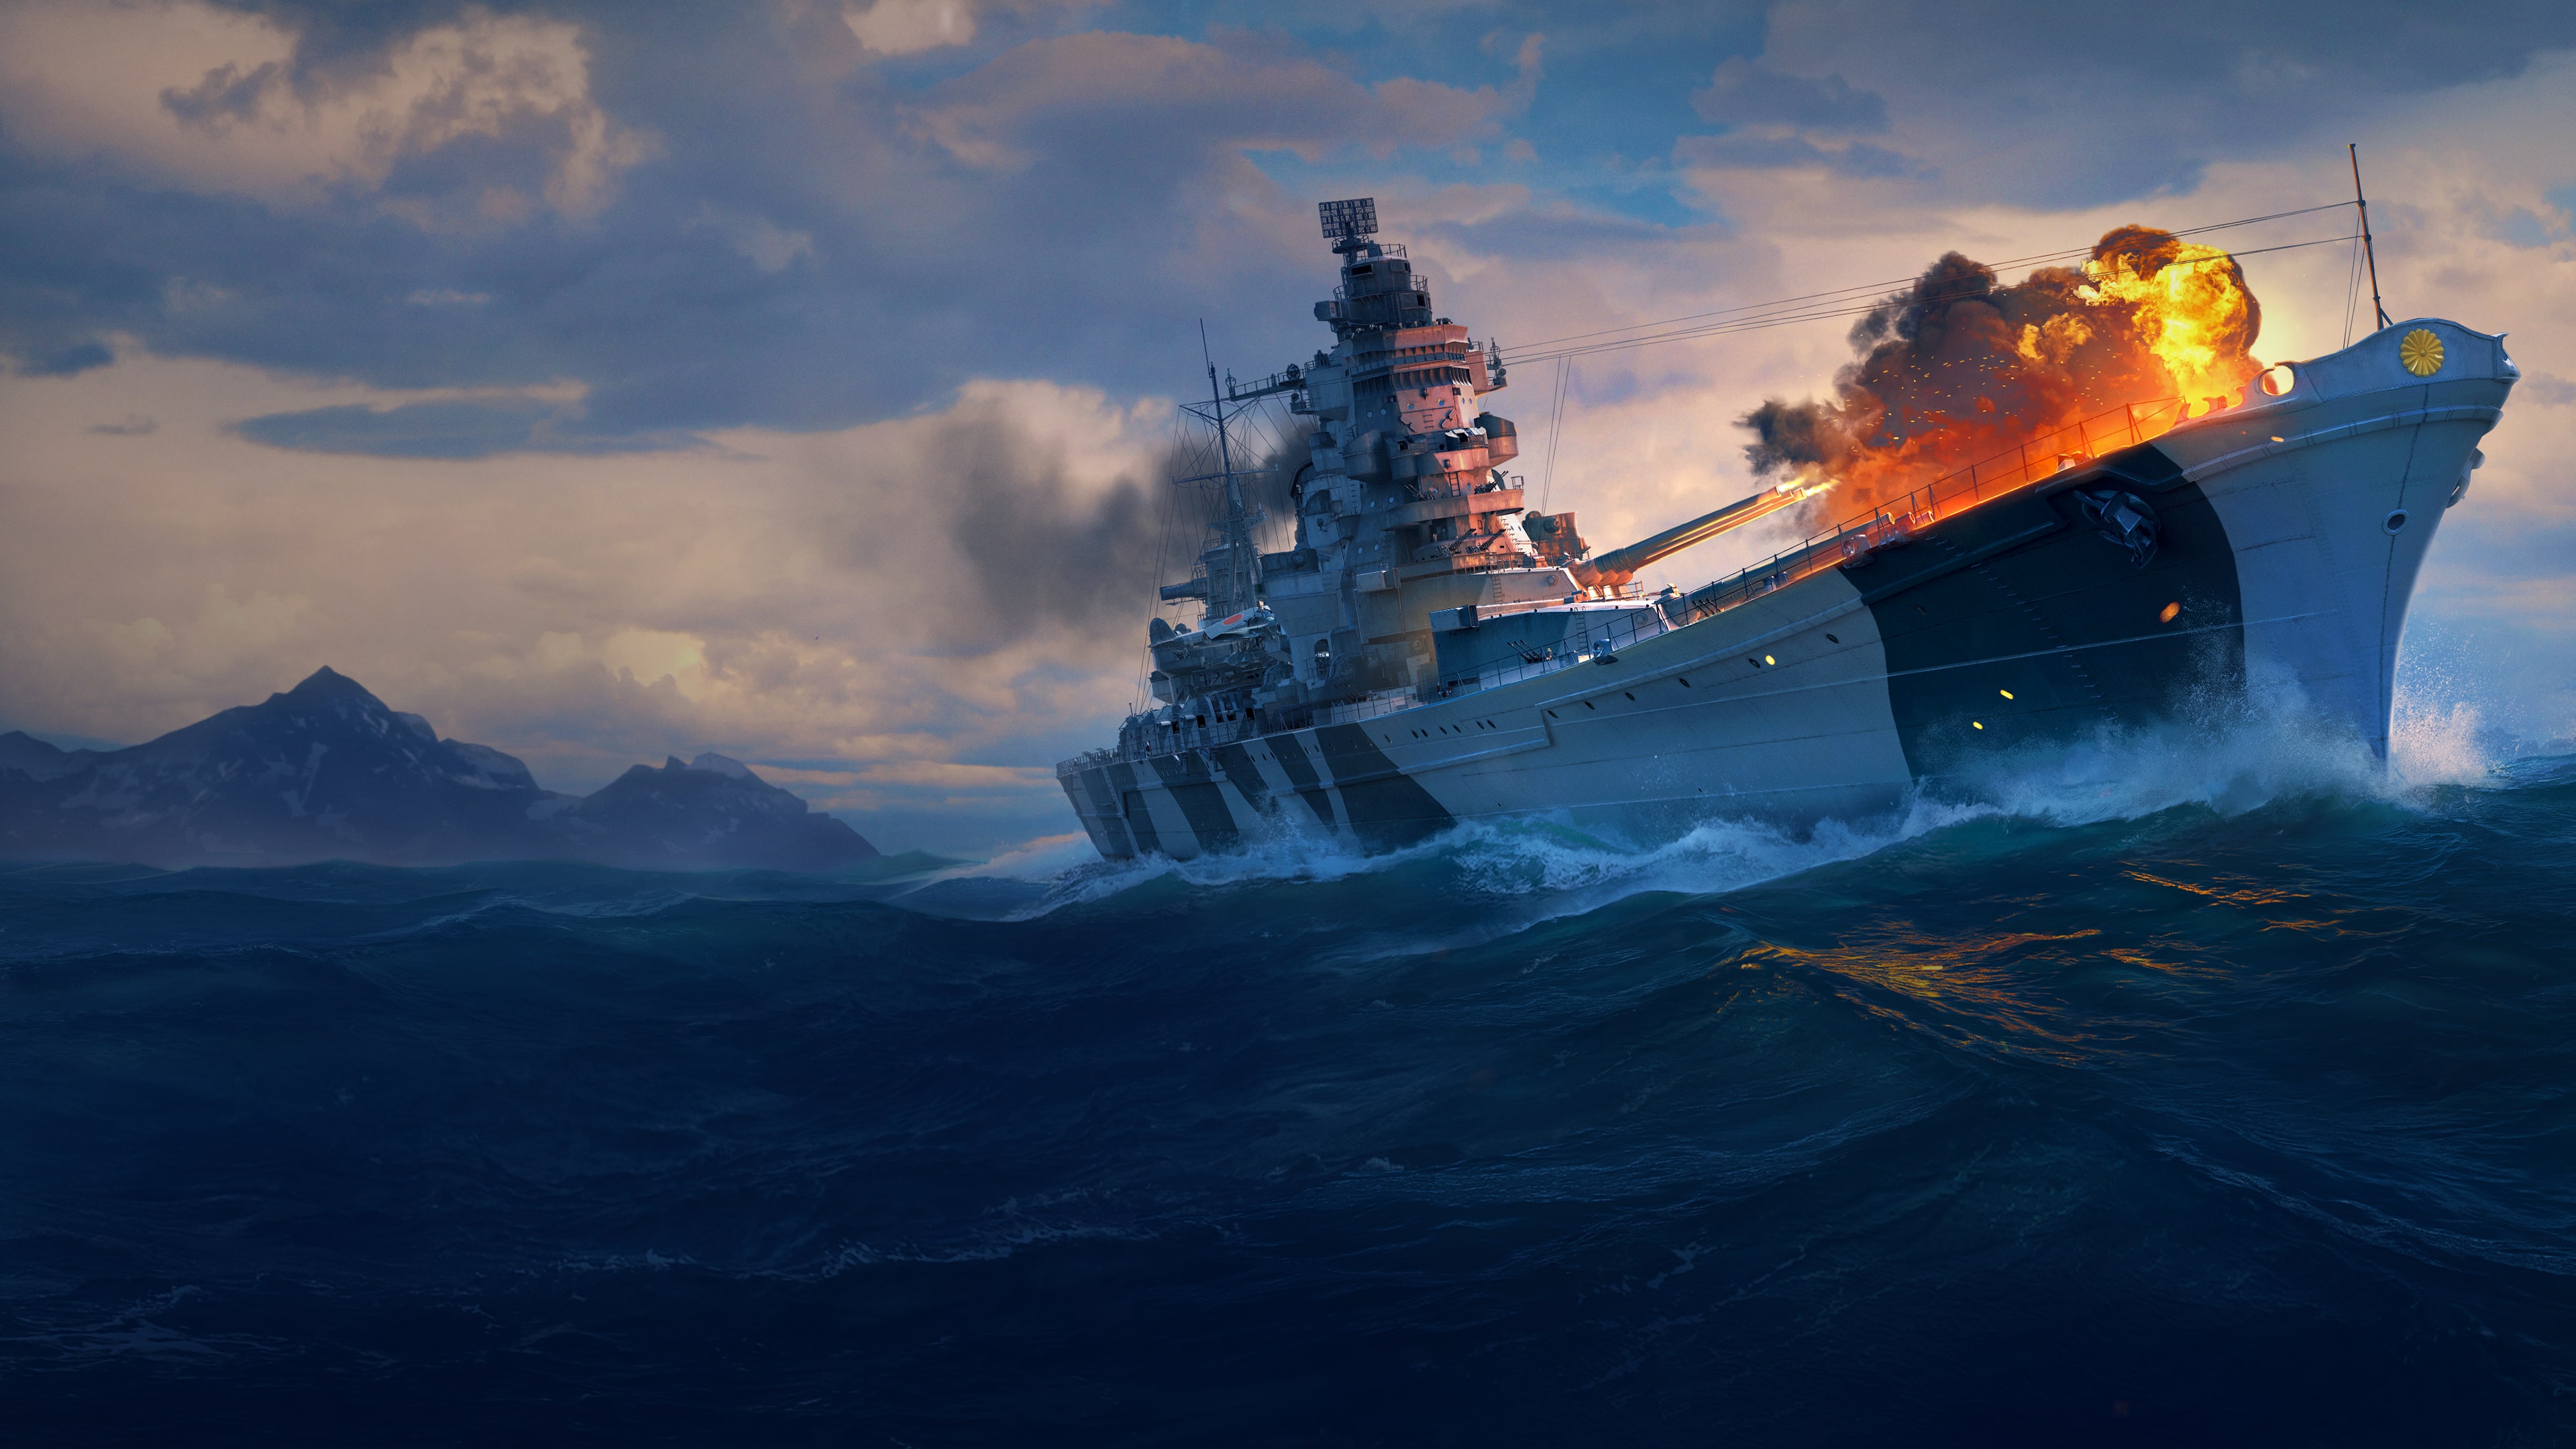 ships coming to world of warships legends